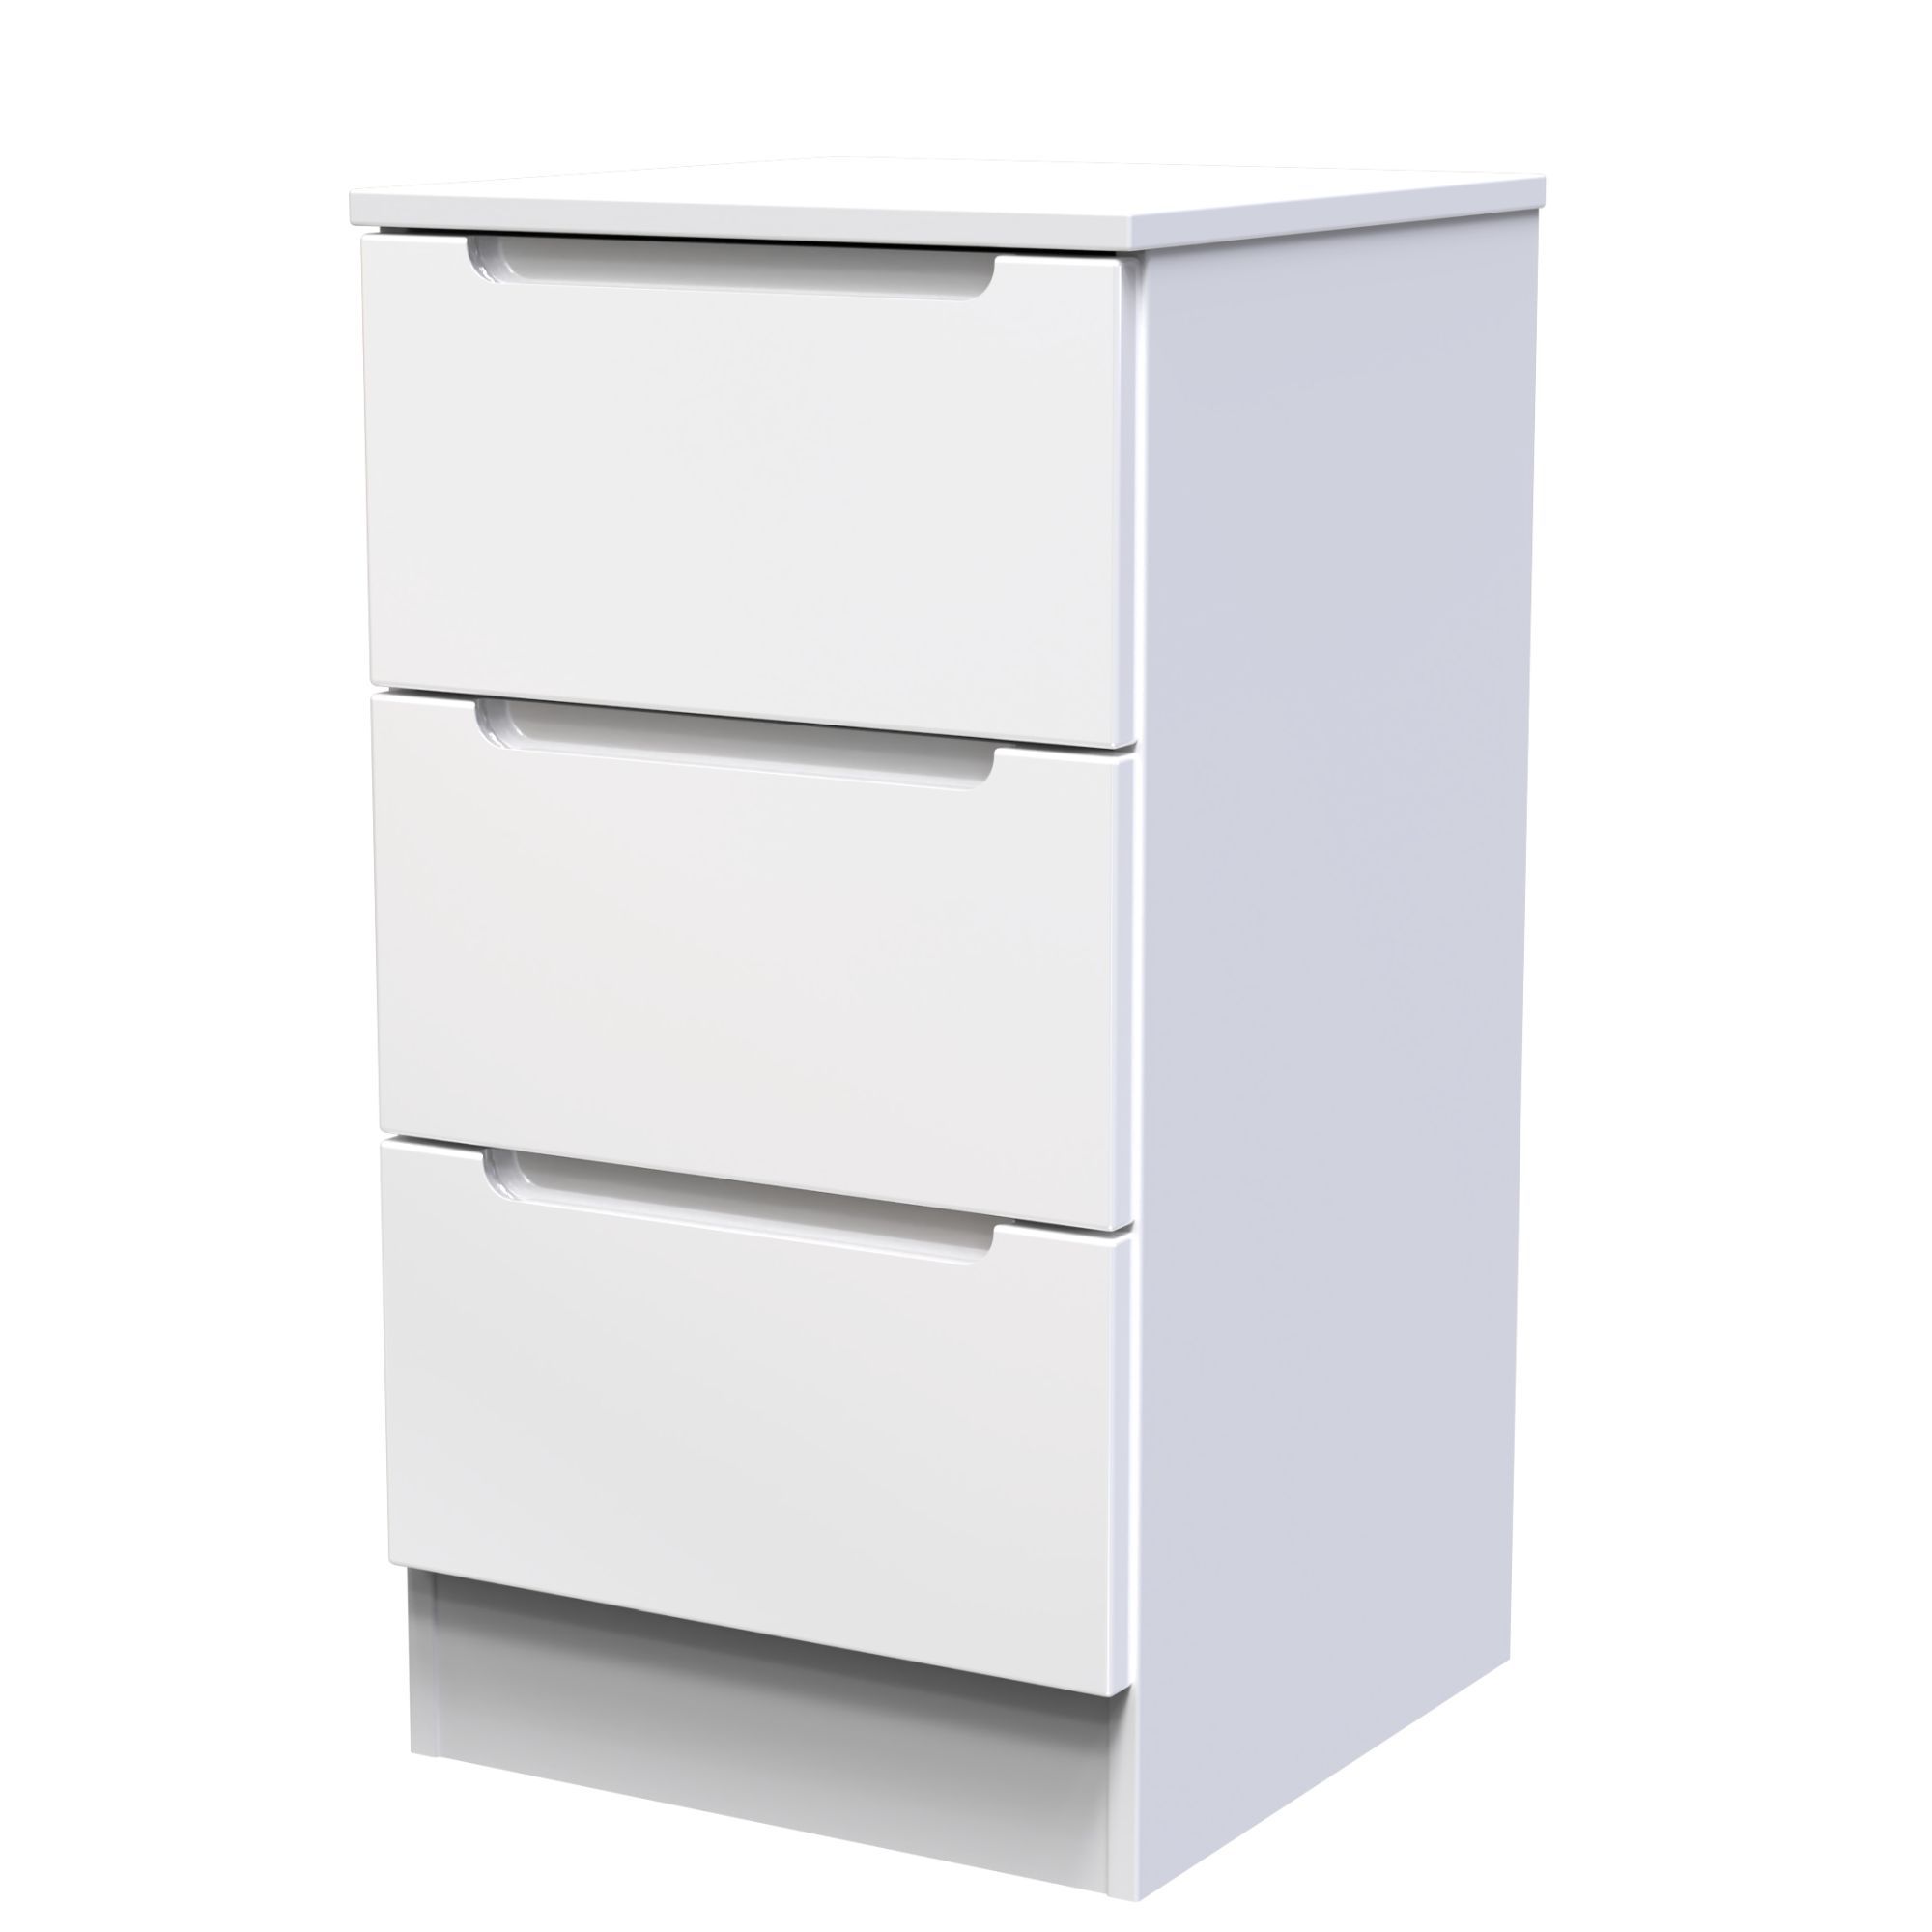 Milan Ready assembled White 3 Drawer Bedside chest (H)685mm (W)370mm (D)390mm